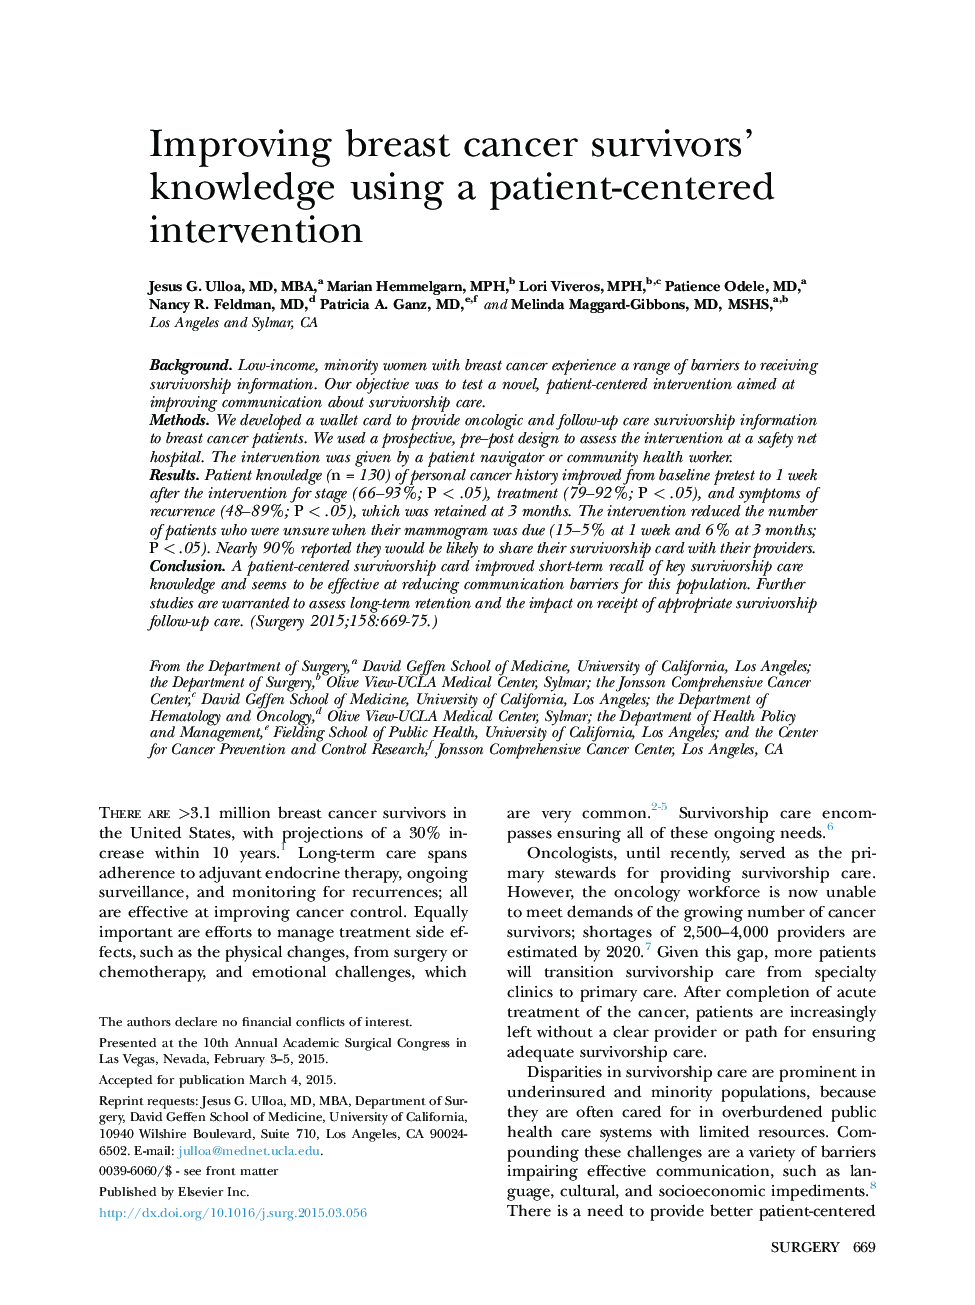 Improving breast cancer survivors’ knowledge using a patient-centered intervention 